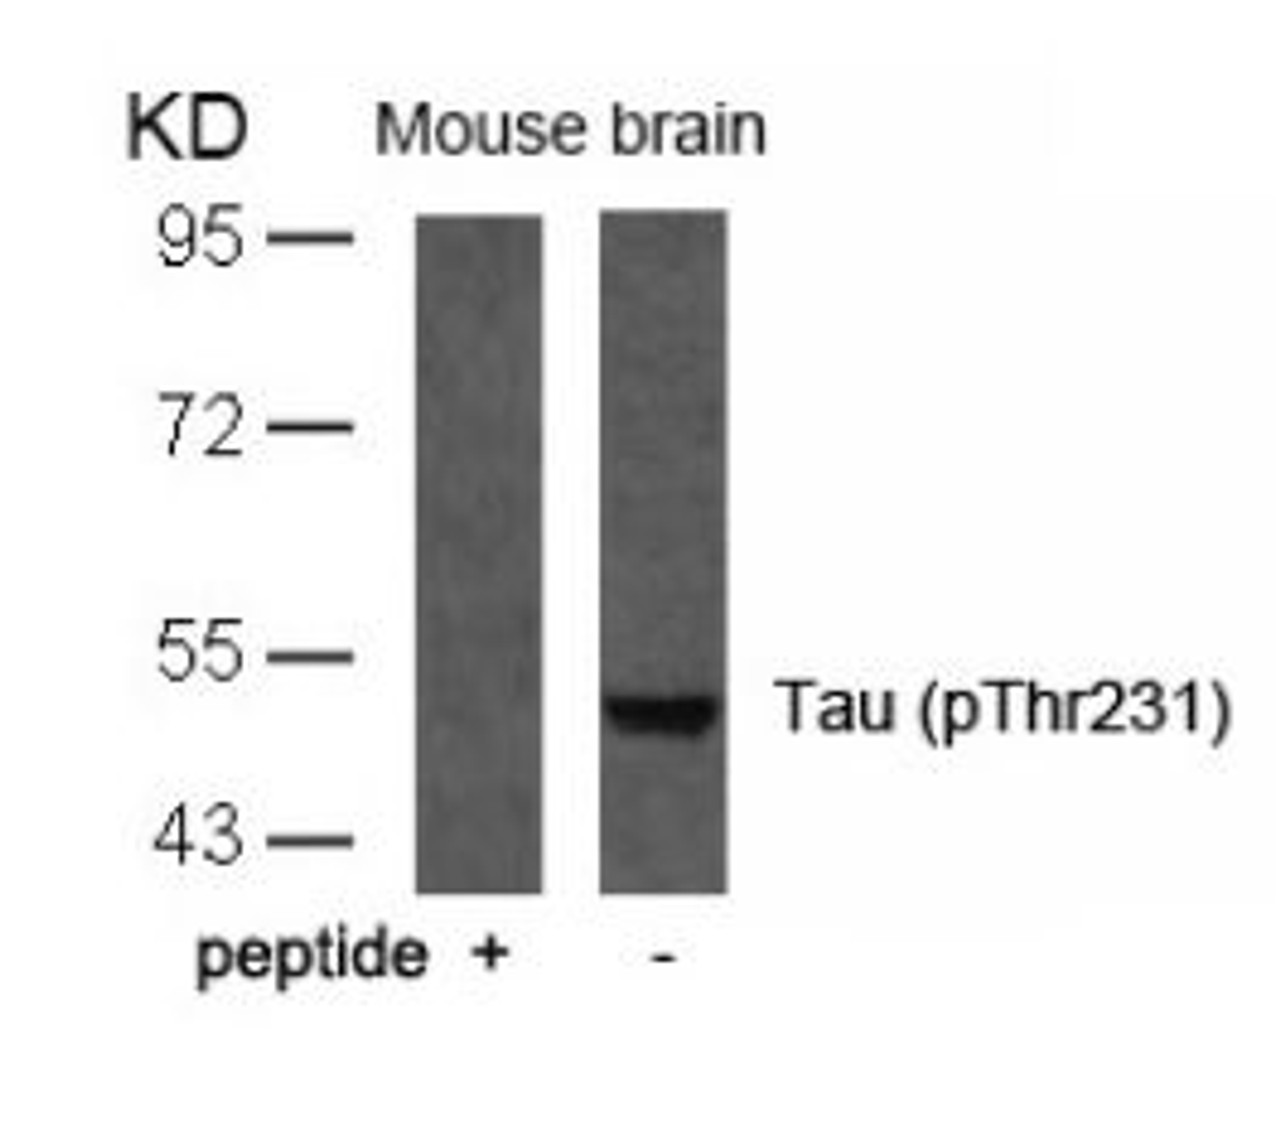 Western blot analysis of lysed extracts from mouse brain tissue using Tau (Phospho-Thr231) .